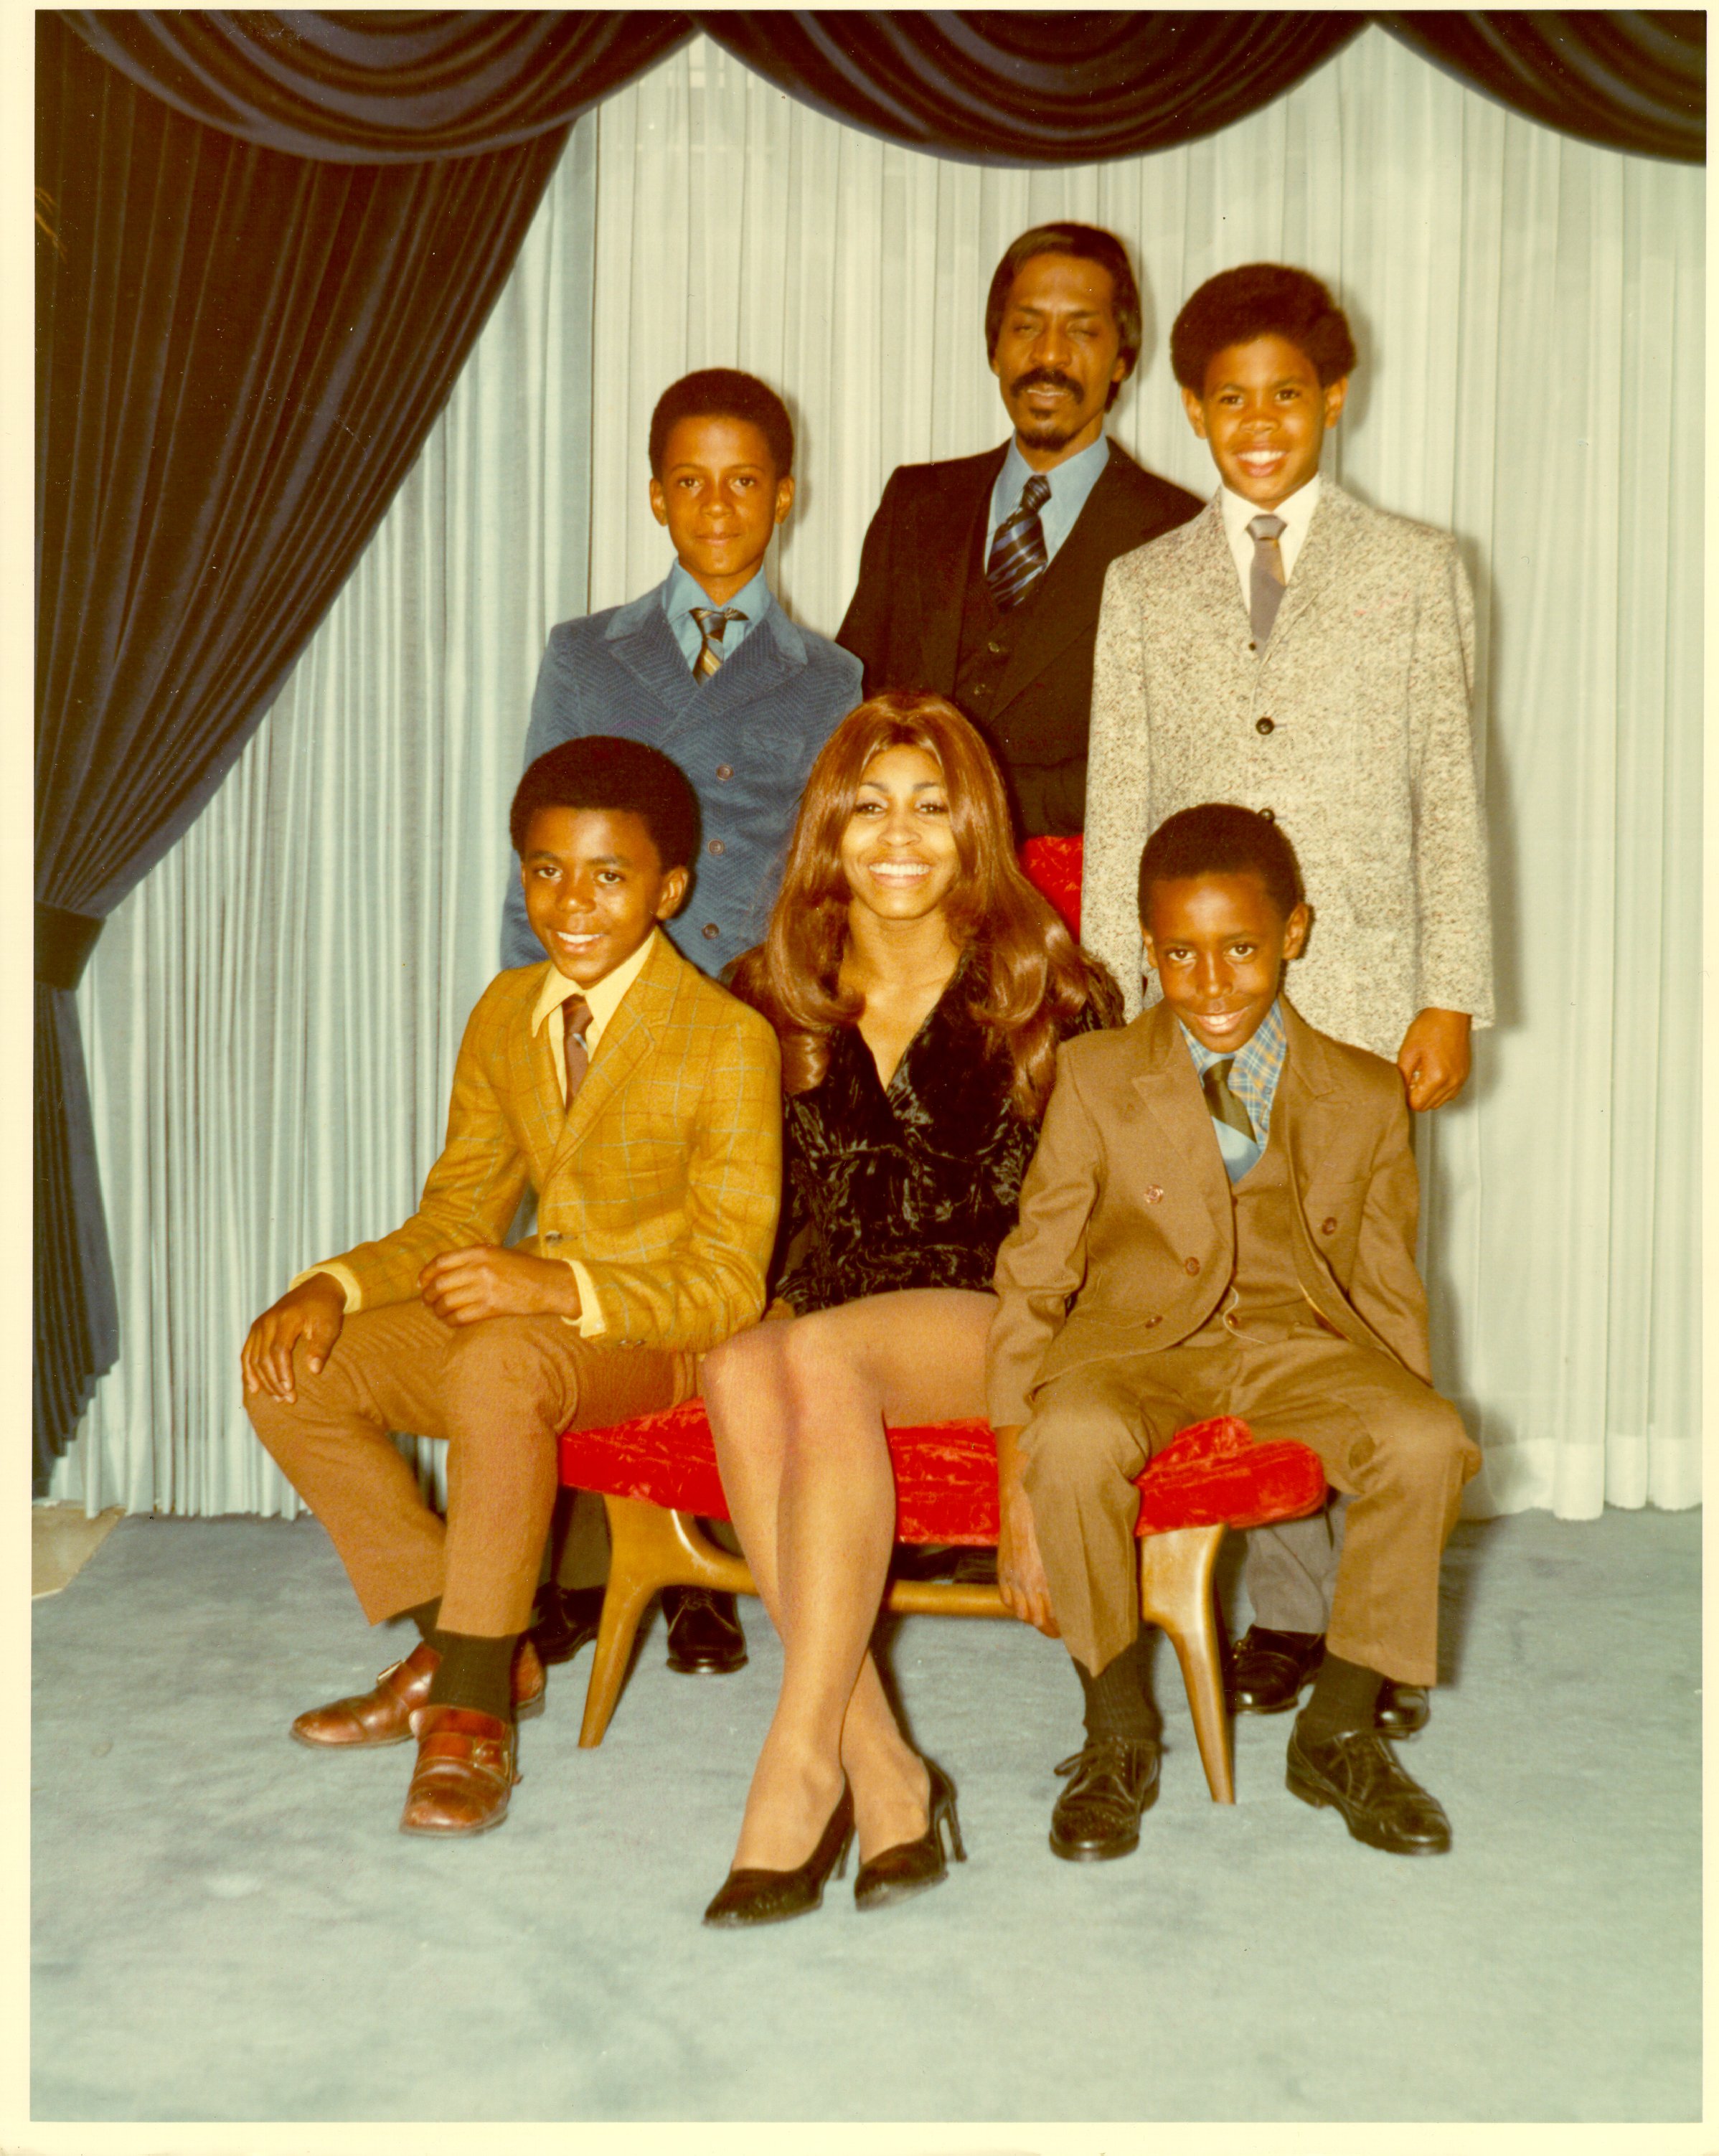 Ike and Tina Turner pose for a portrait with their son and step-sons circa 1972, Michael Turner, Ike Turner Jr. Craig Hill, and Ronnie Turner | Source: Getty Images